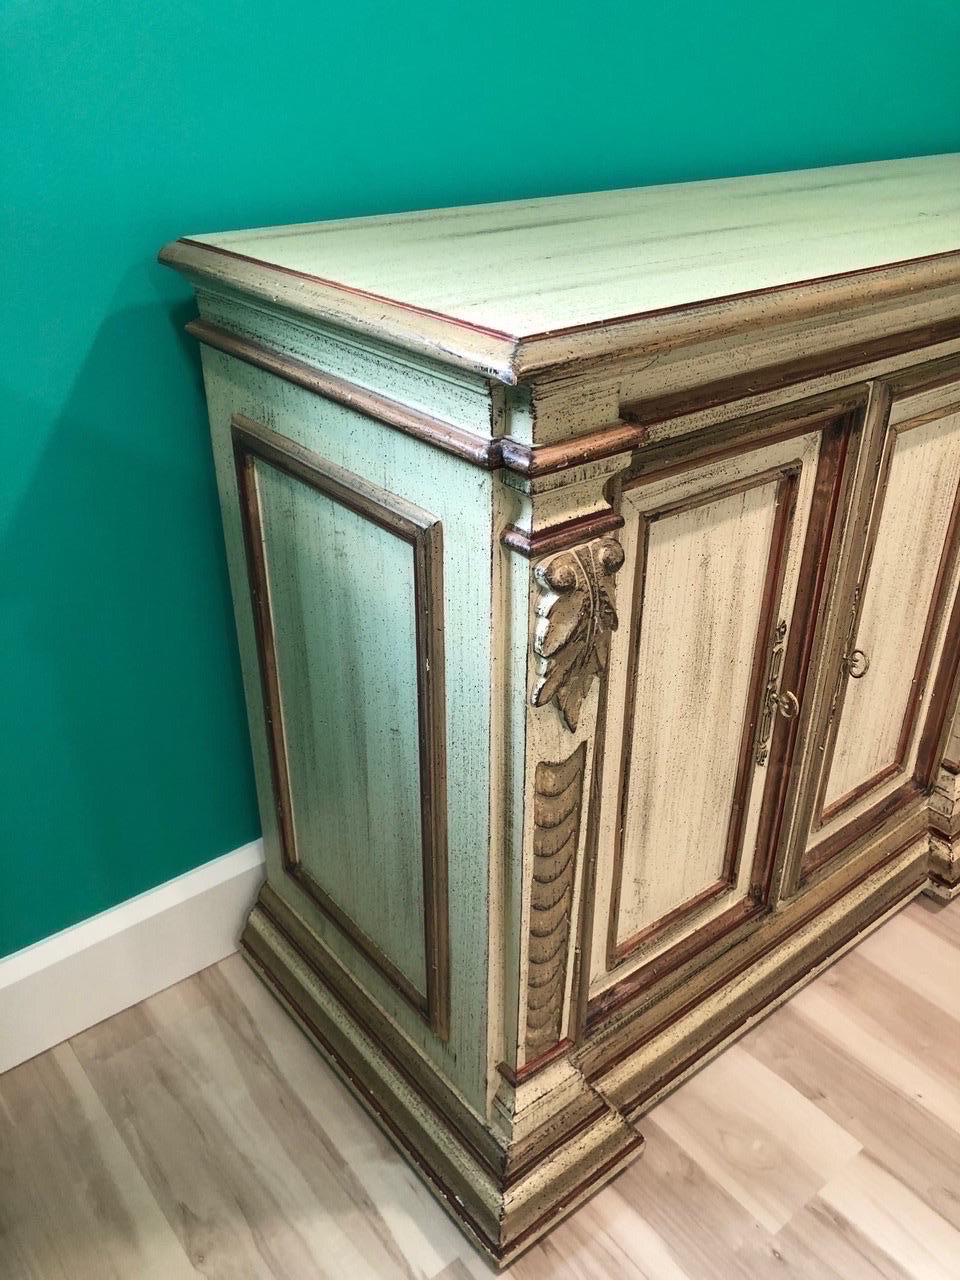 Extraordinary Vintage Century Credenza, Sideboard. Century Furniture Company shows little record of this piece in their archives, likely meaning this was a custom finished piece making it's replication impossible. Exceptional original hand painted